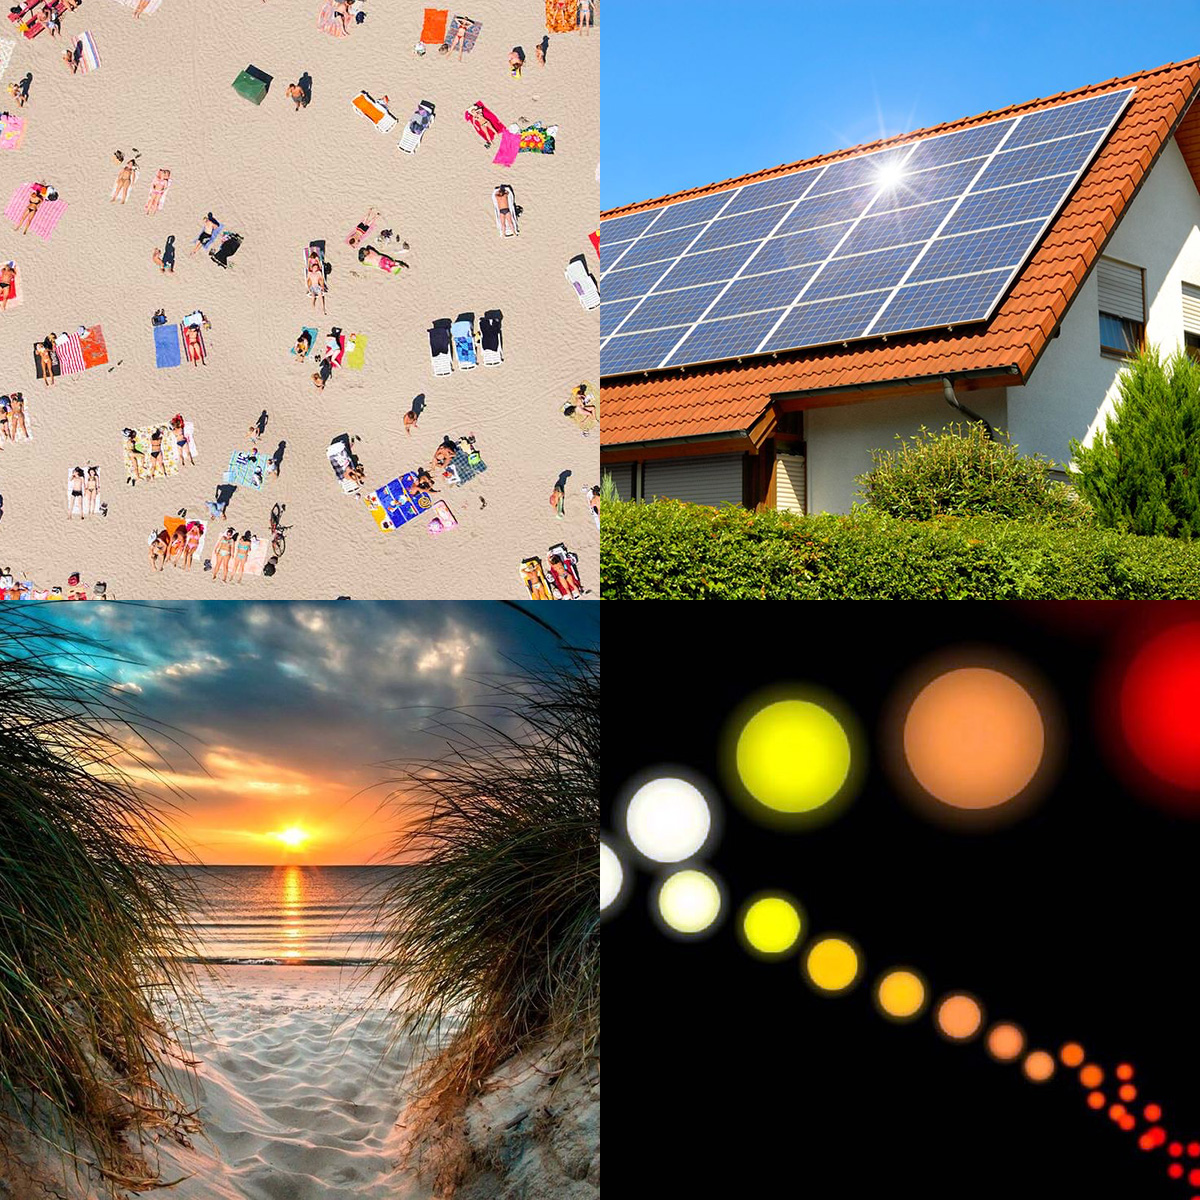 Image with four quadrants. Upper-left: sunbathers on a sandy beach. Upper-right: solar panels on an adobe roof in bright sunlight. Lower-left: beautiful sunset on a sandy beach with grass. Lower-Right: sequence of stars of varying size and color due to blackbody radiation.